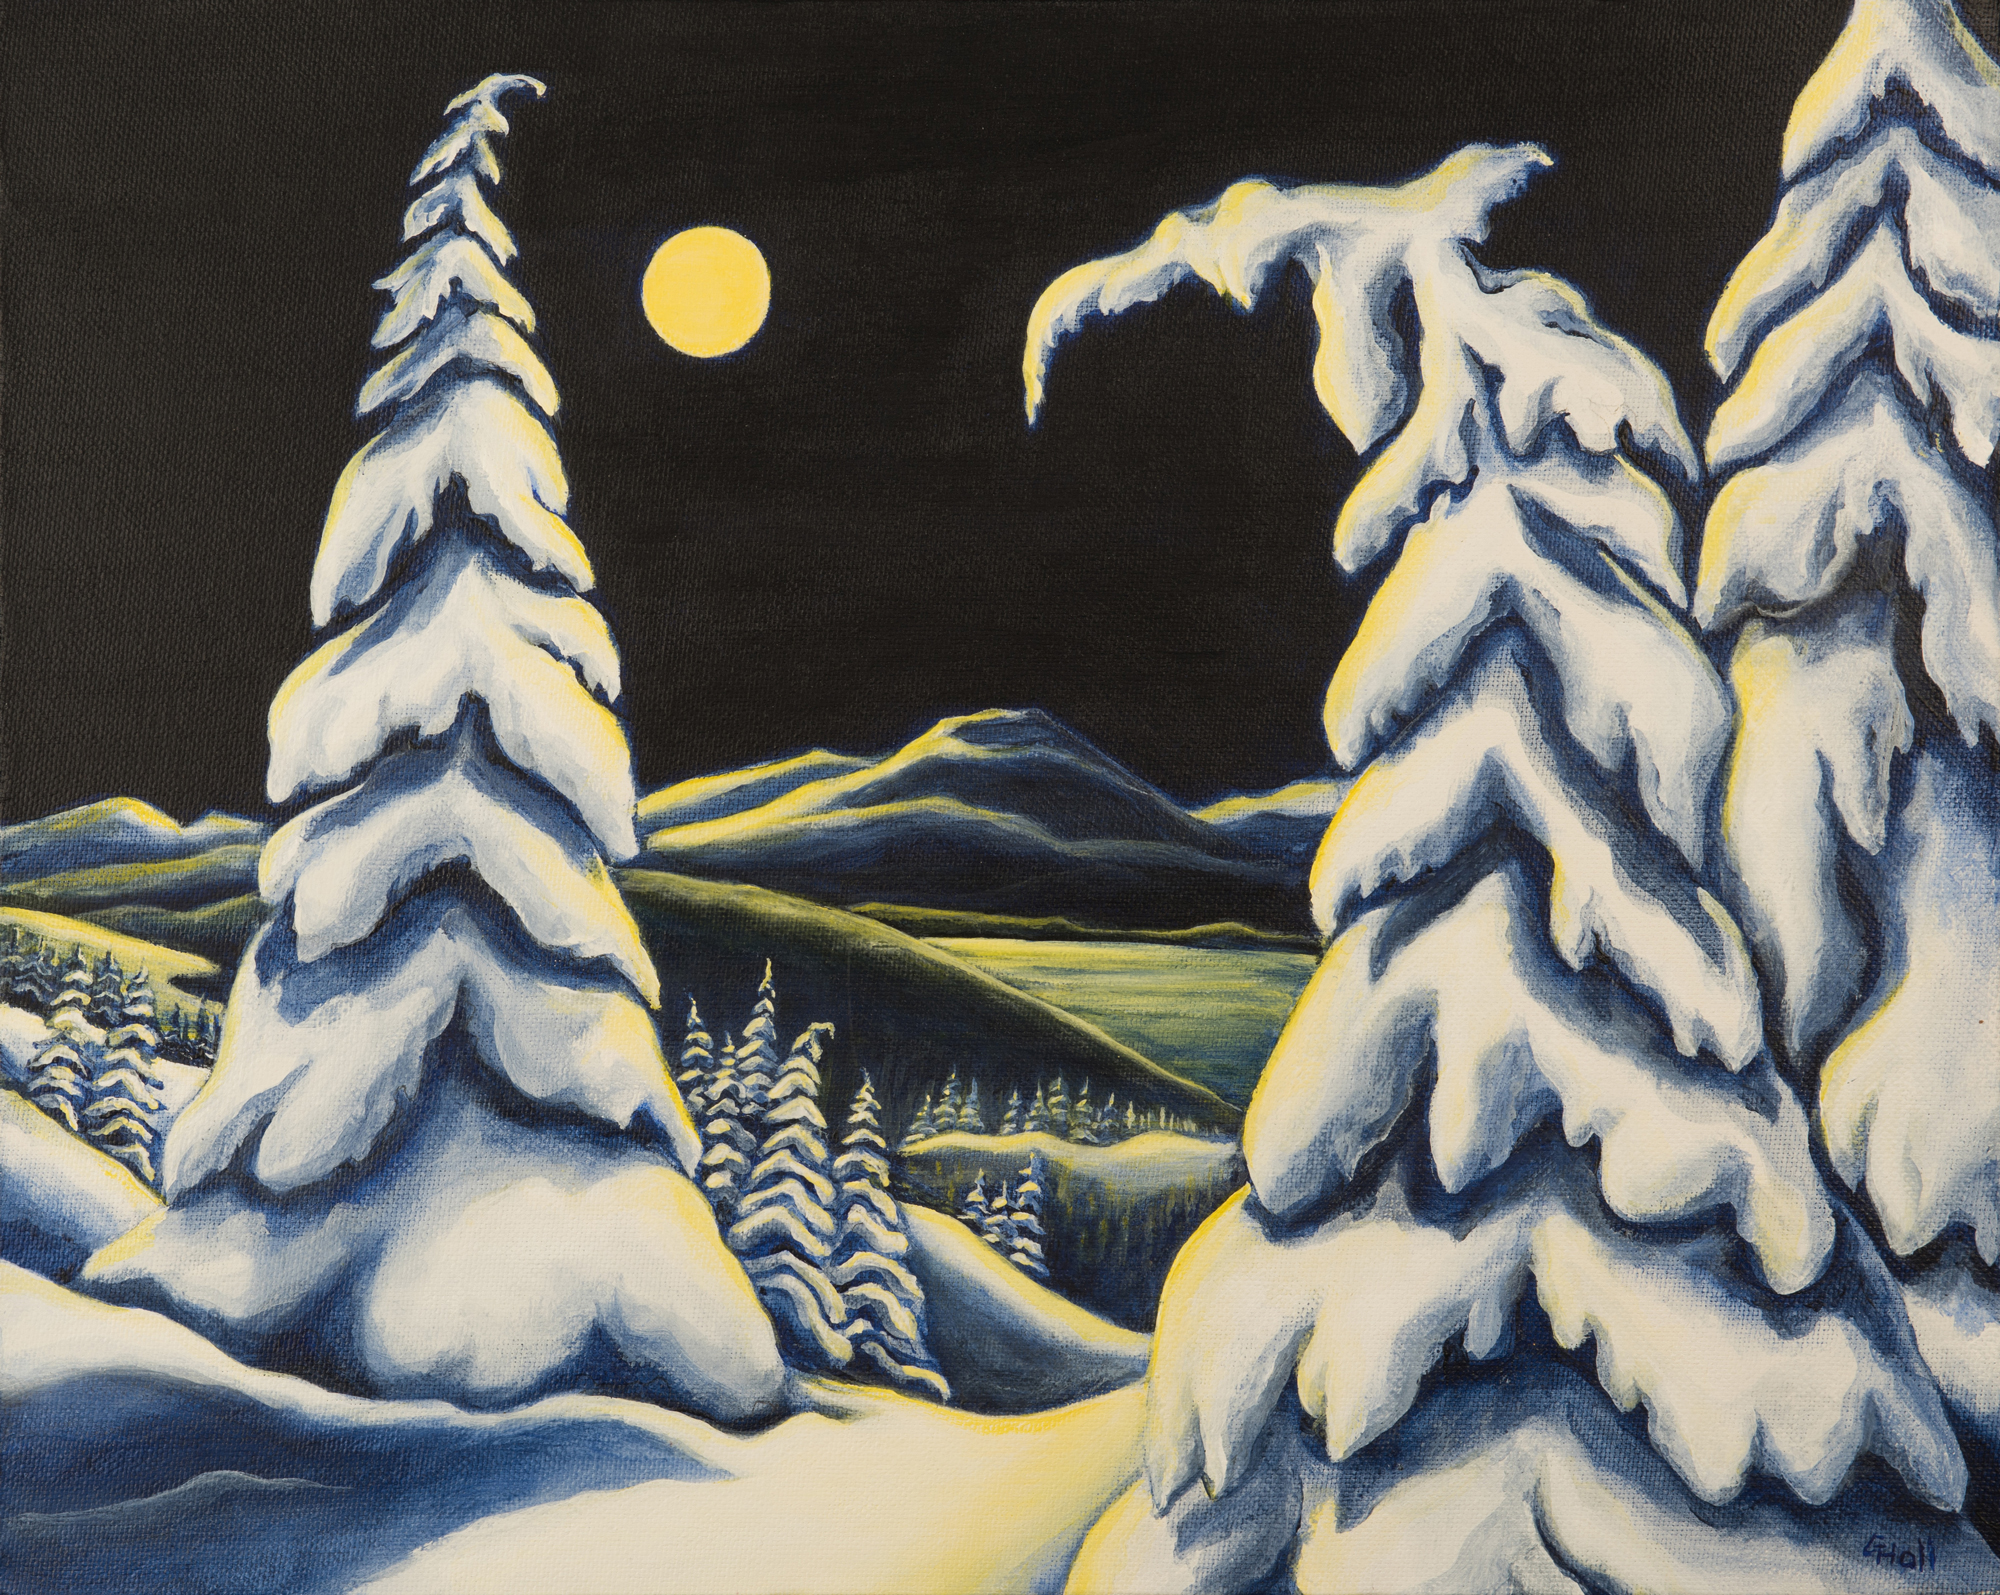 A painting by Ginny Hall depicting snow covered trees in the moonlight.